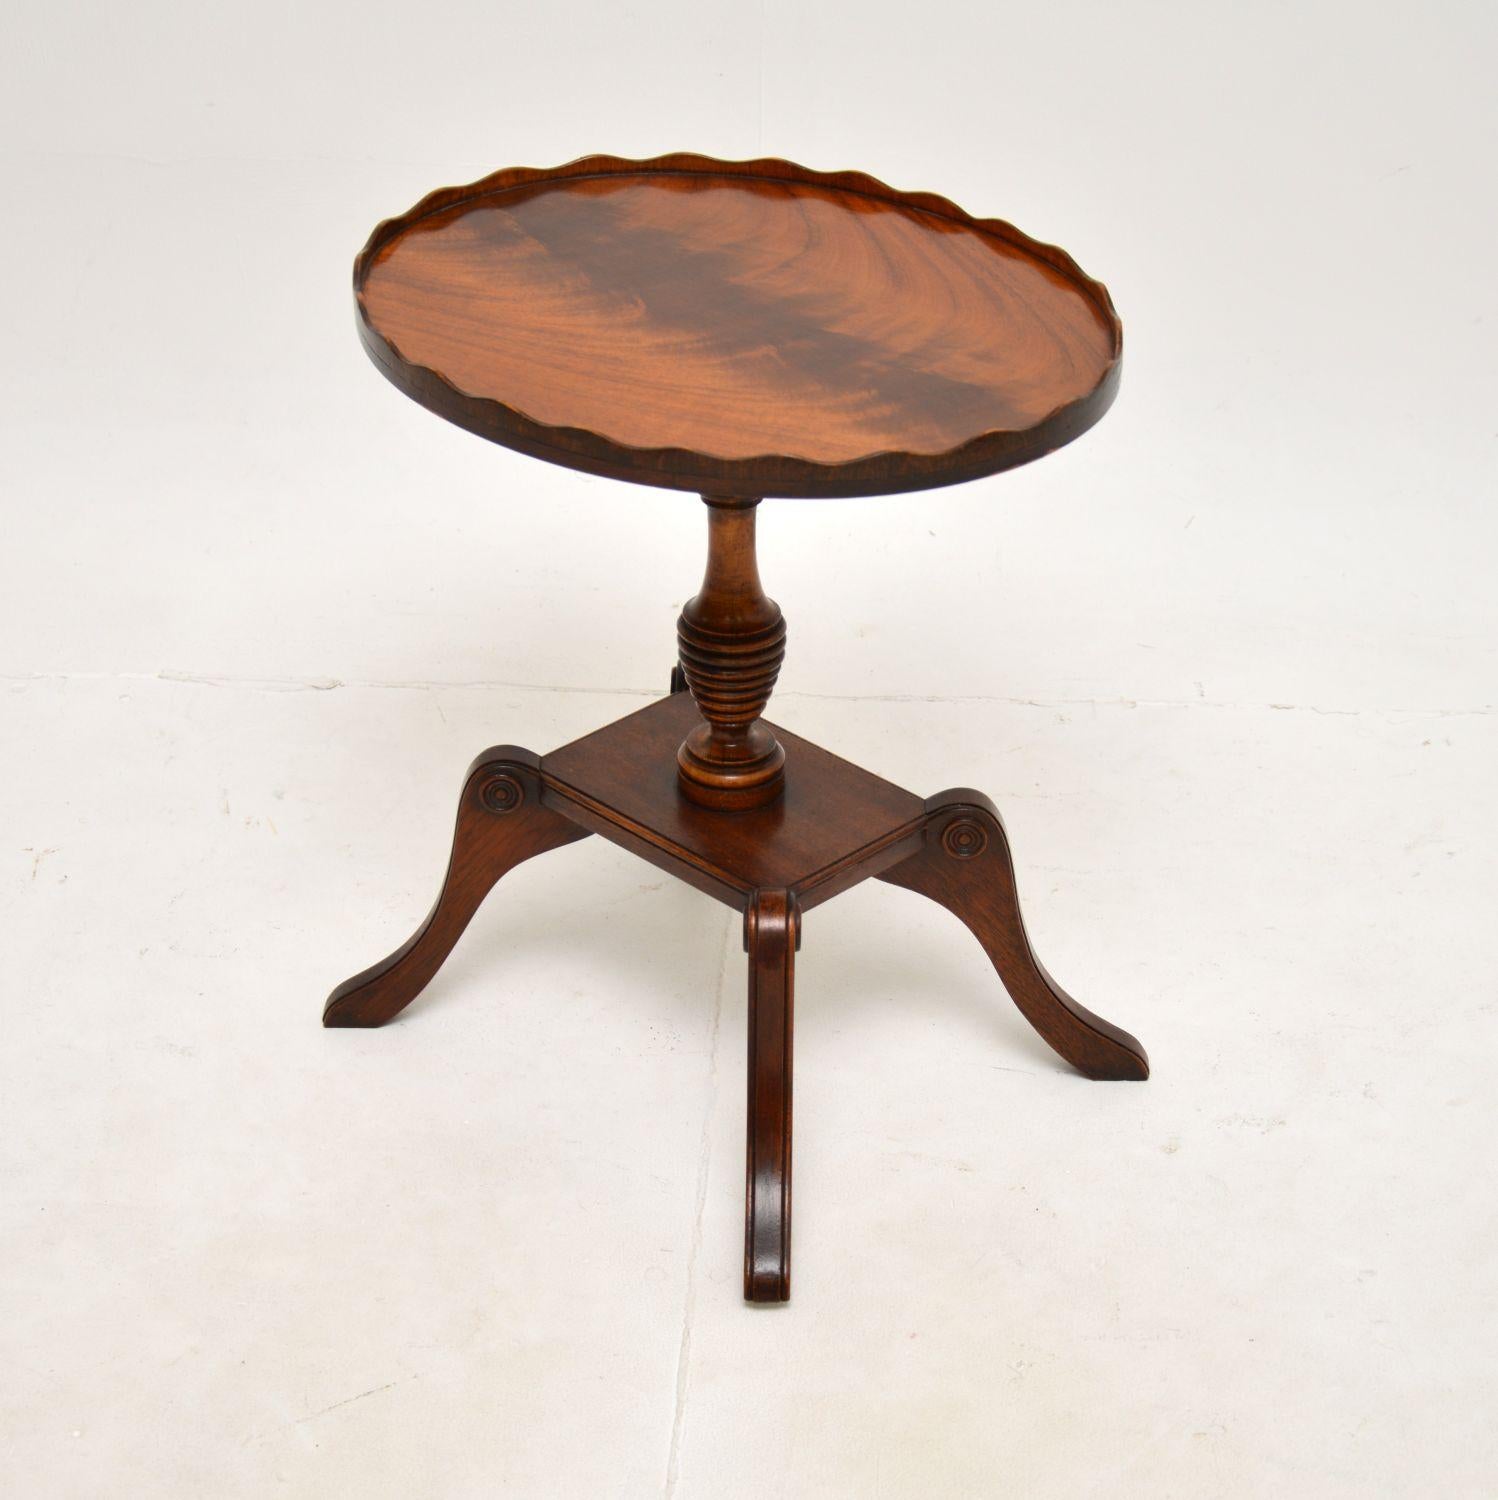 British Antique Regency Style Pie Crust Coffee / Side Table For Sale